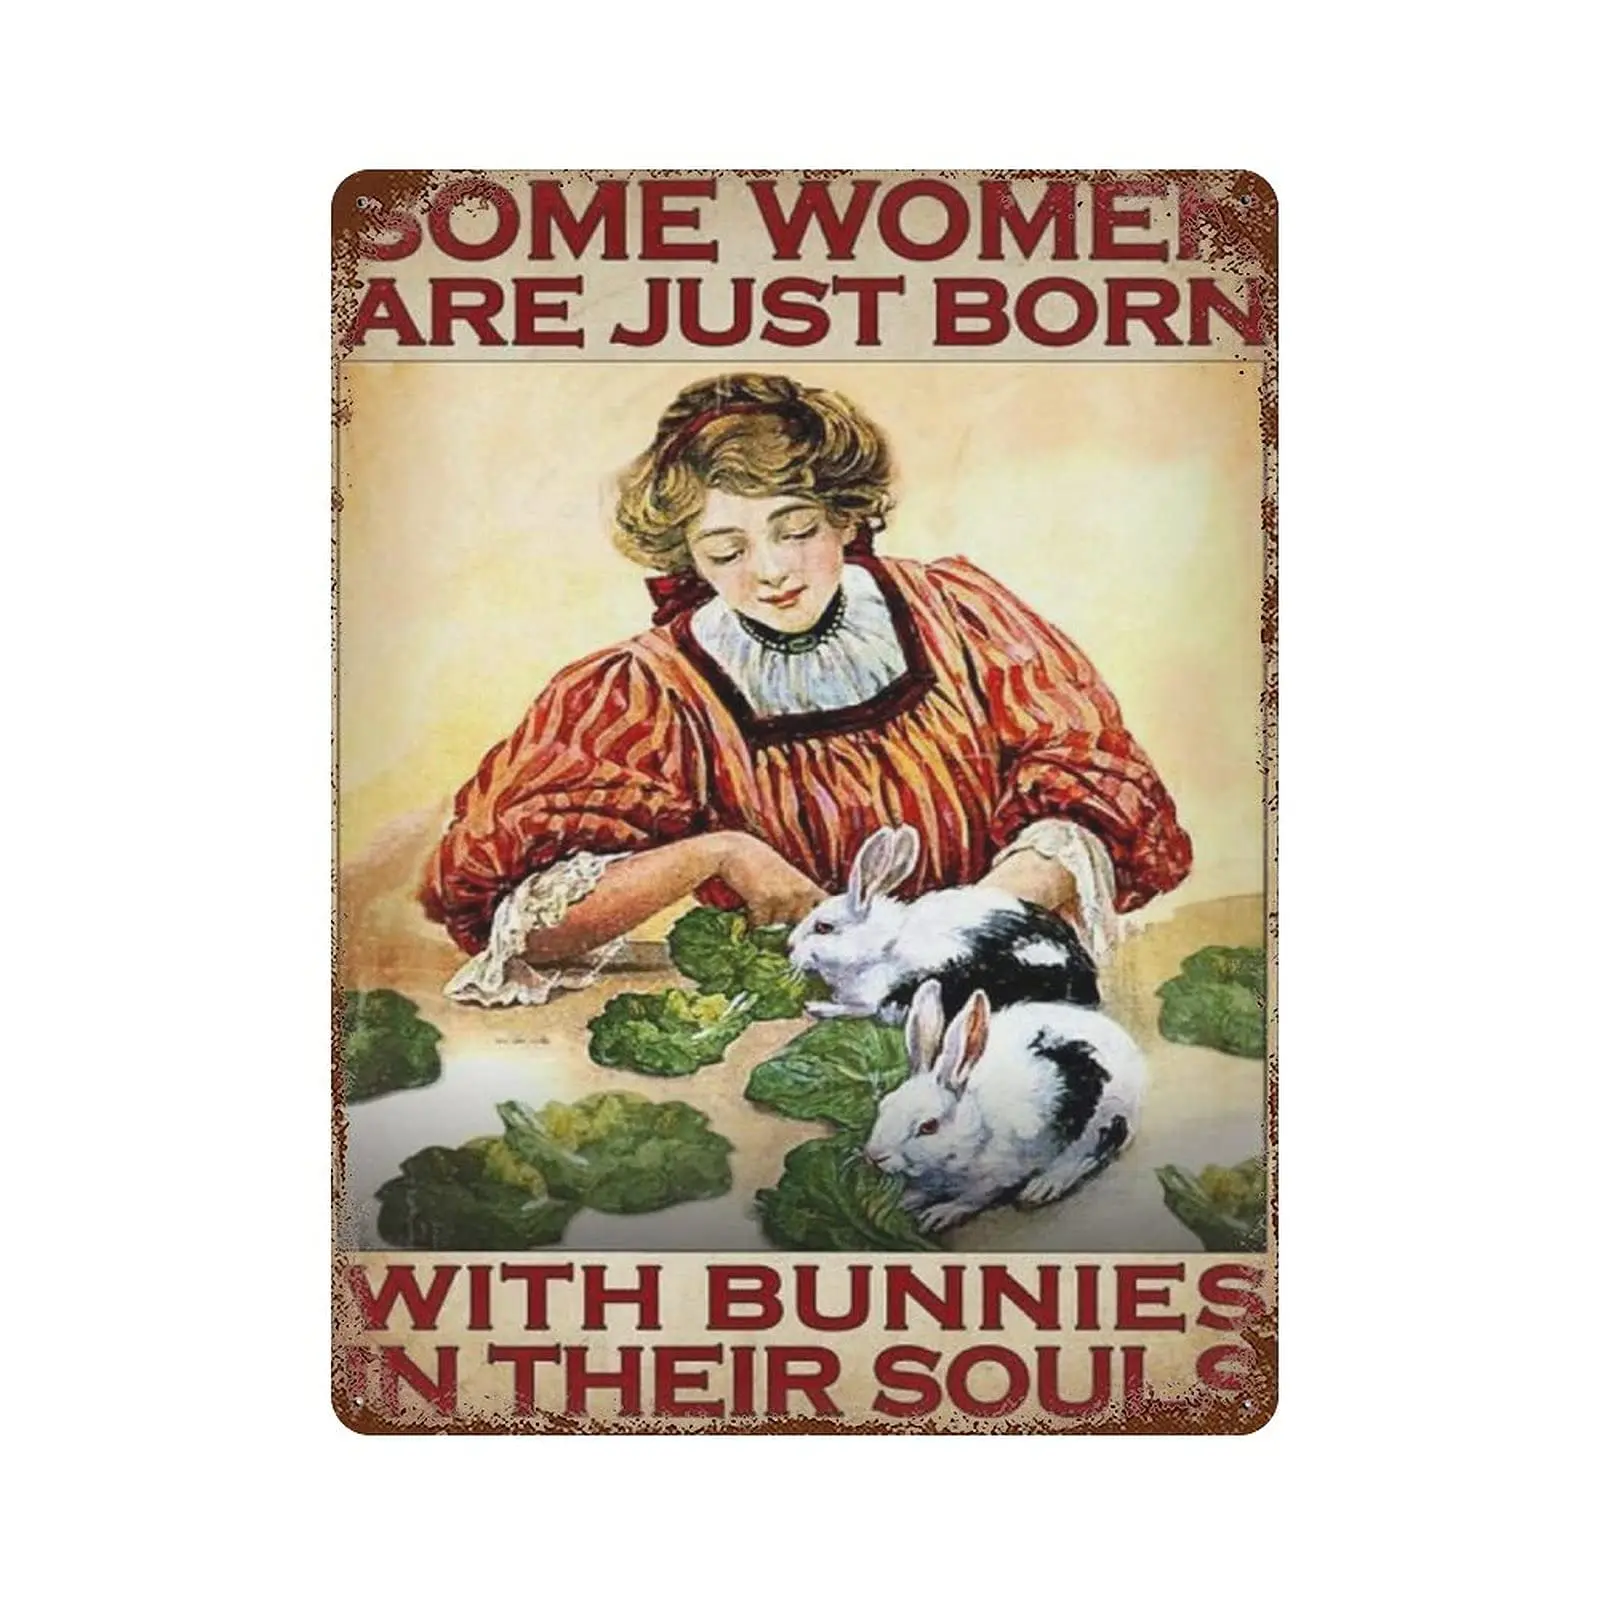 

Some Wome Are Just Born With Bunnies In Their Souls Vintage metal Hanging Plaque Funny Wall Decor For Home Bars Pubs Cafes Bathr